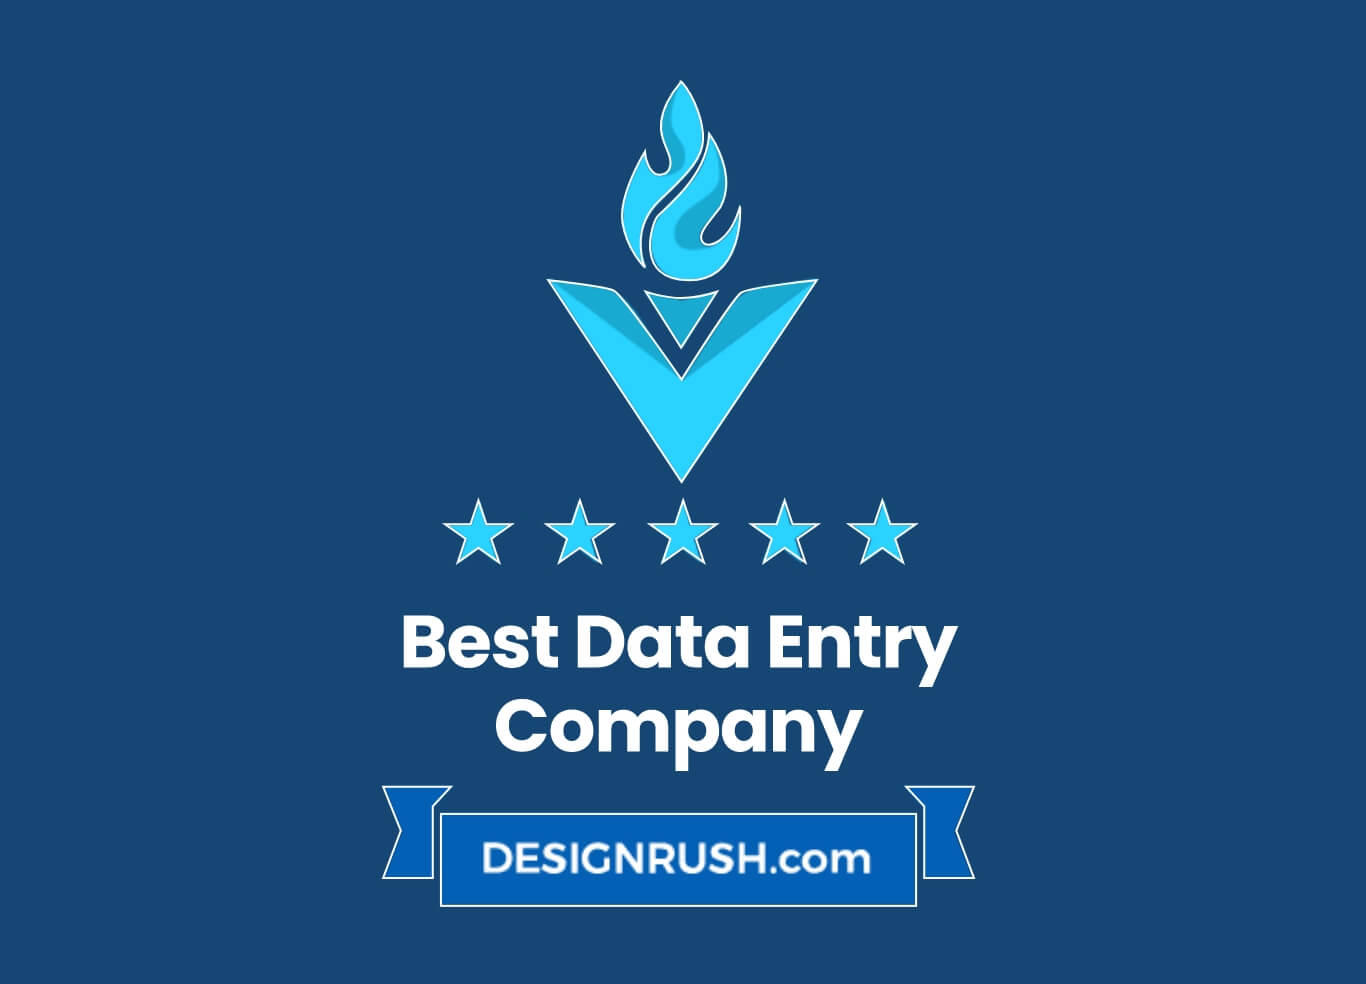 Uniquesdata as Best Data Entry Company by DesignRush